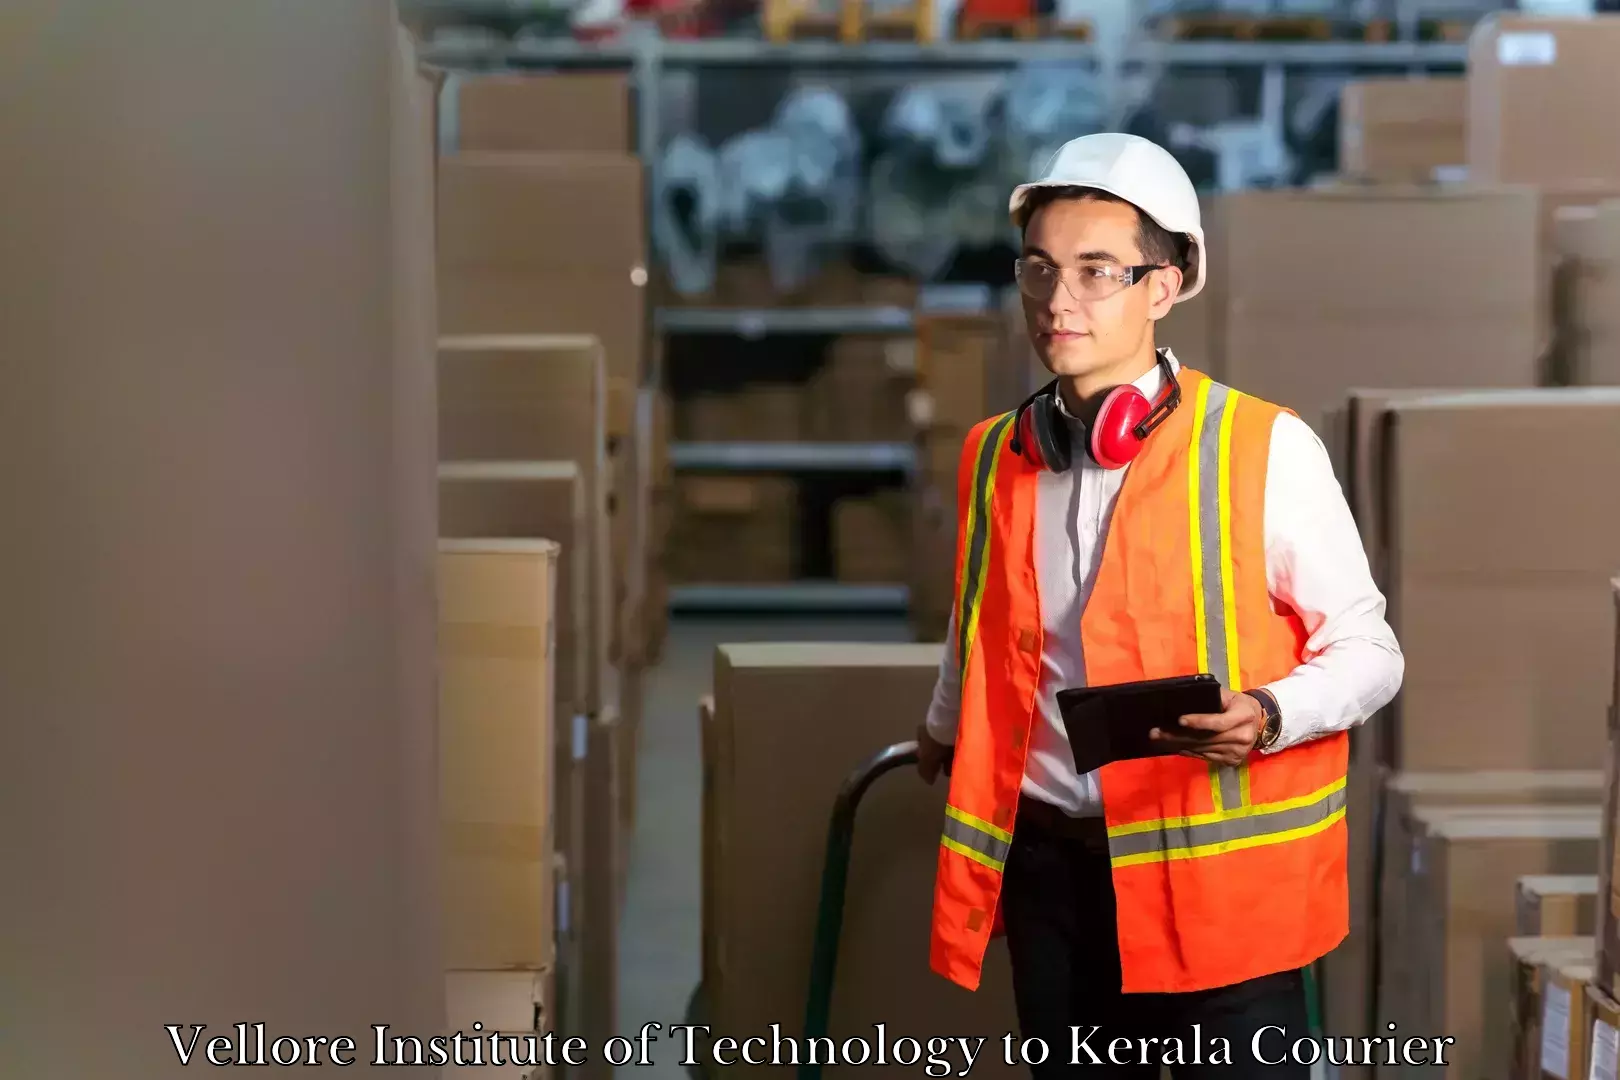 Baggage shipping advice Vellore Institute of Technology to Kerala